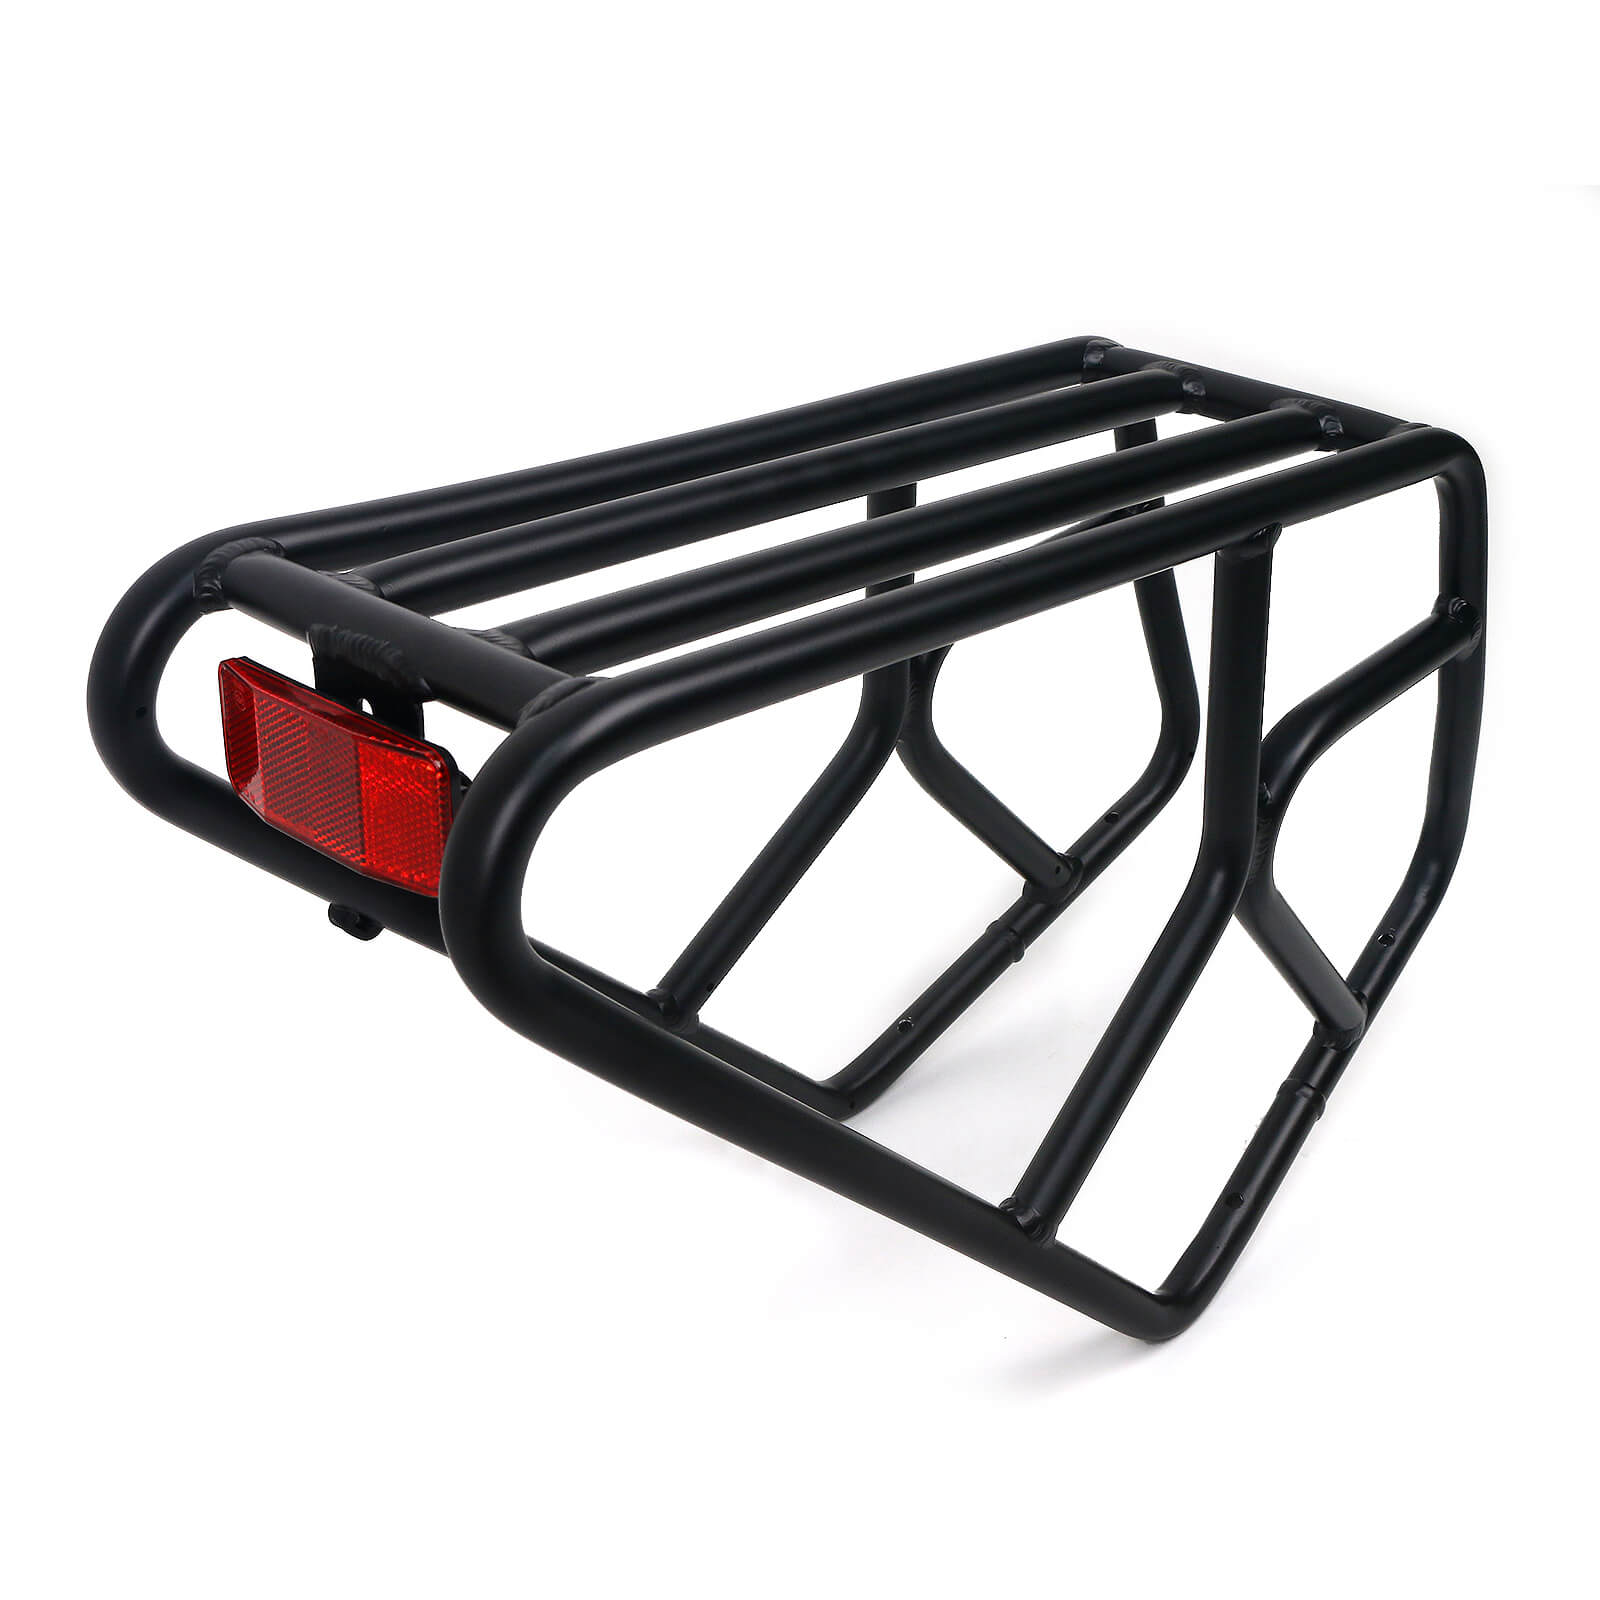 Wallke X3 Pro Rear Rack ，The design is simple, ingenious, and durable. Installing the rack takes mere minutes. Make sure the rear frame have the attachment points for the rear rack.